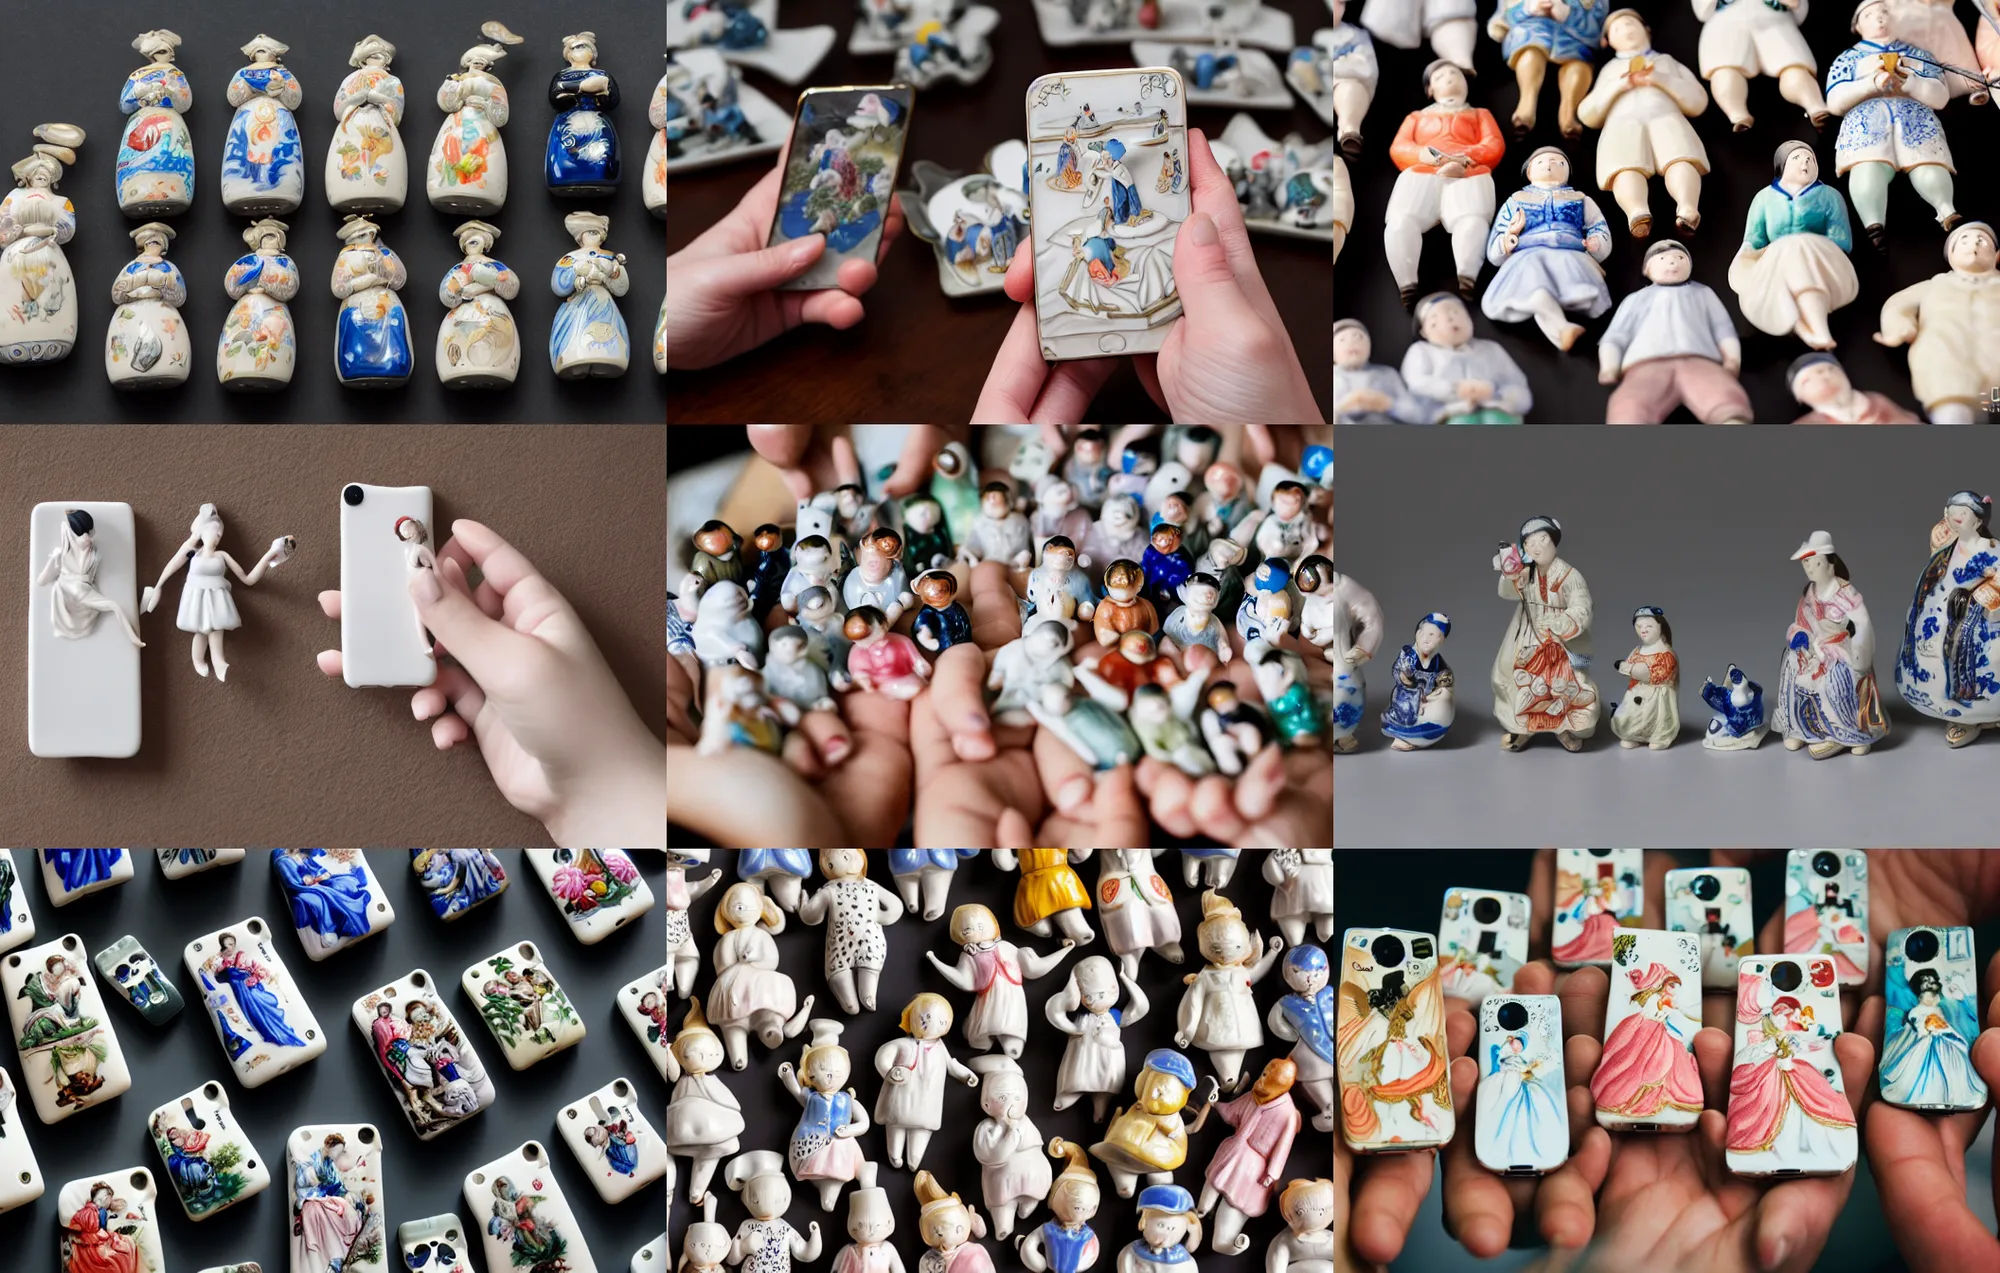 Prompt: A crowd of detailed, hand painted porcelain figurines holding iPhones in their hands, delicate, detailed, Canon TS-E 17mm f/4, pristine quality wallpaper